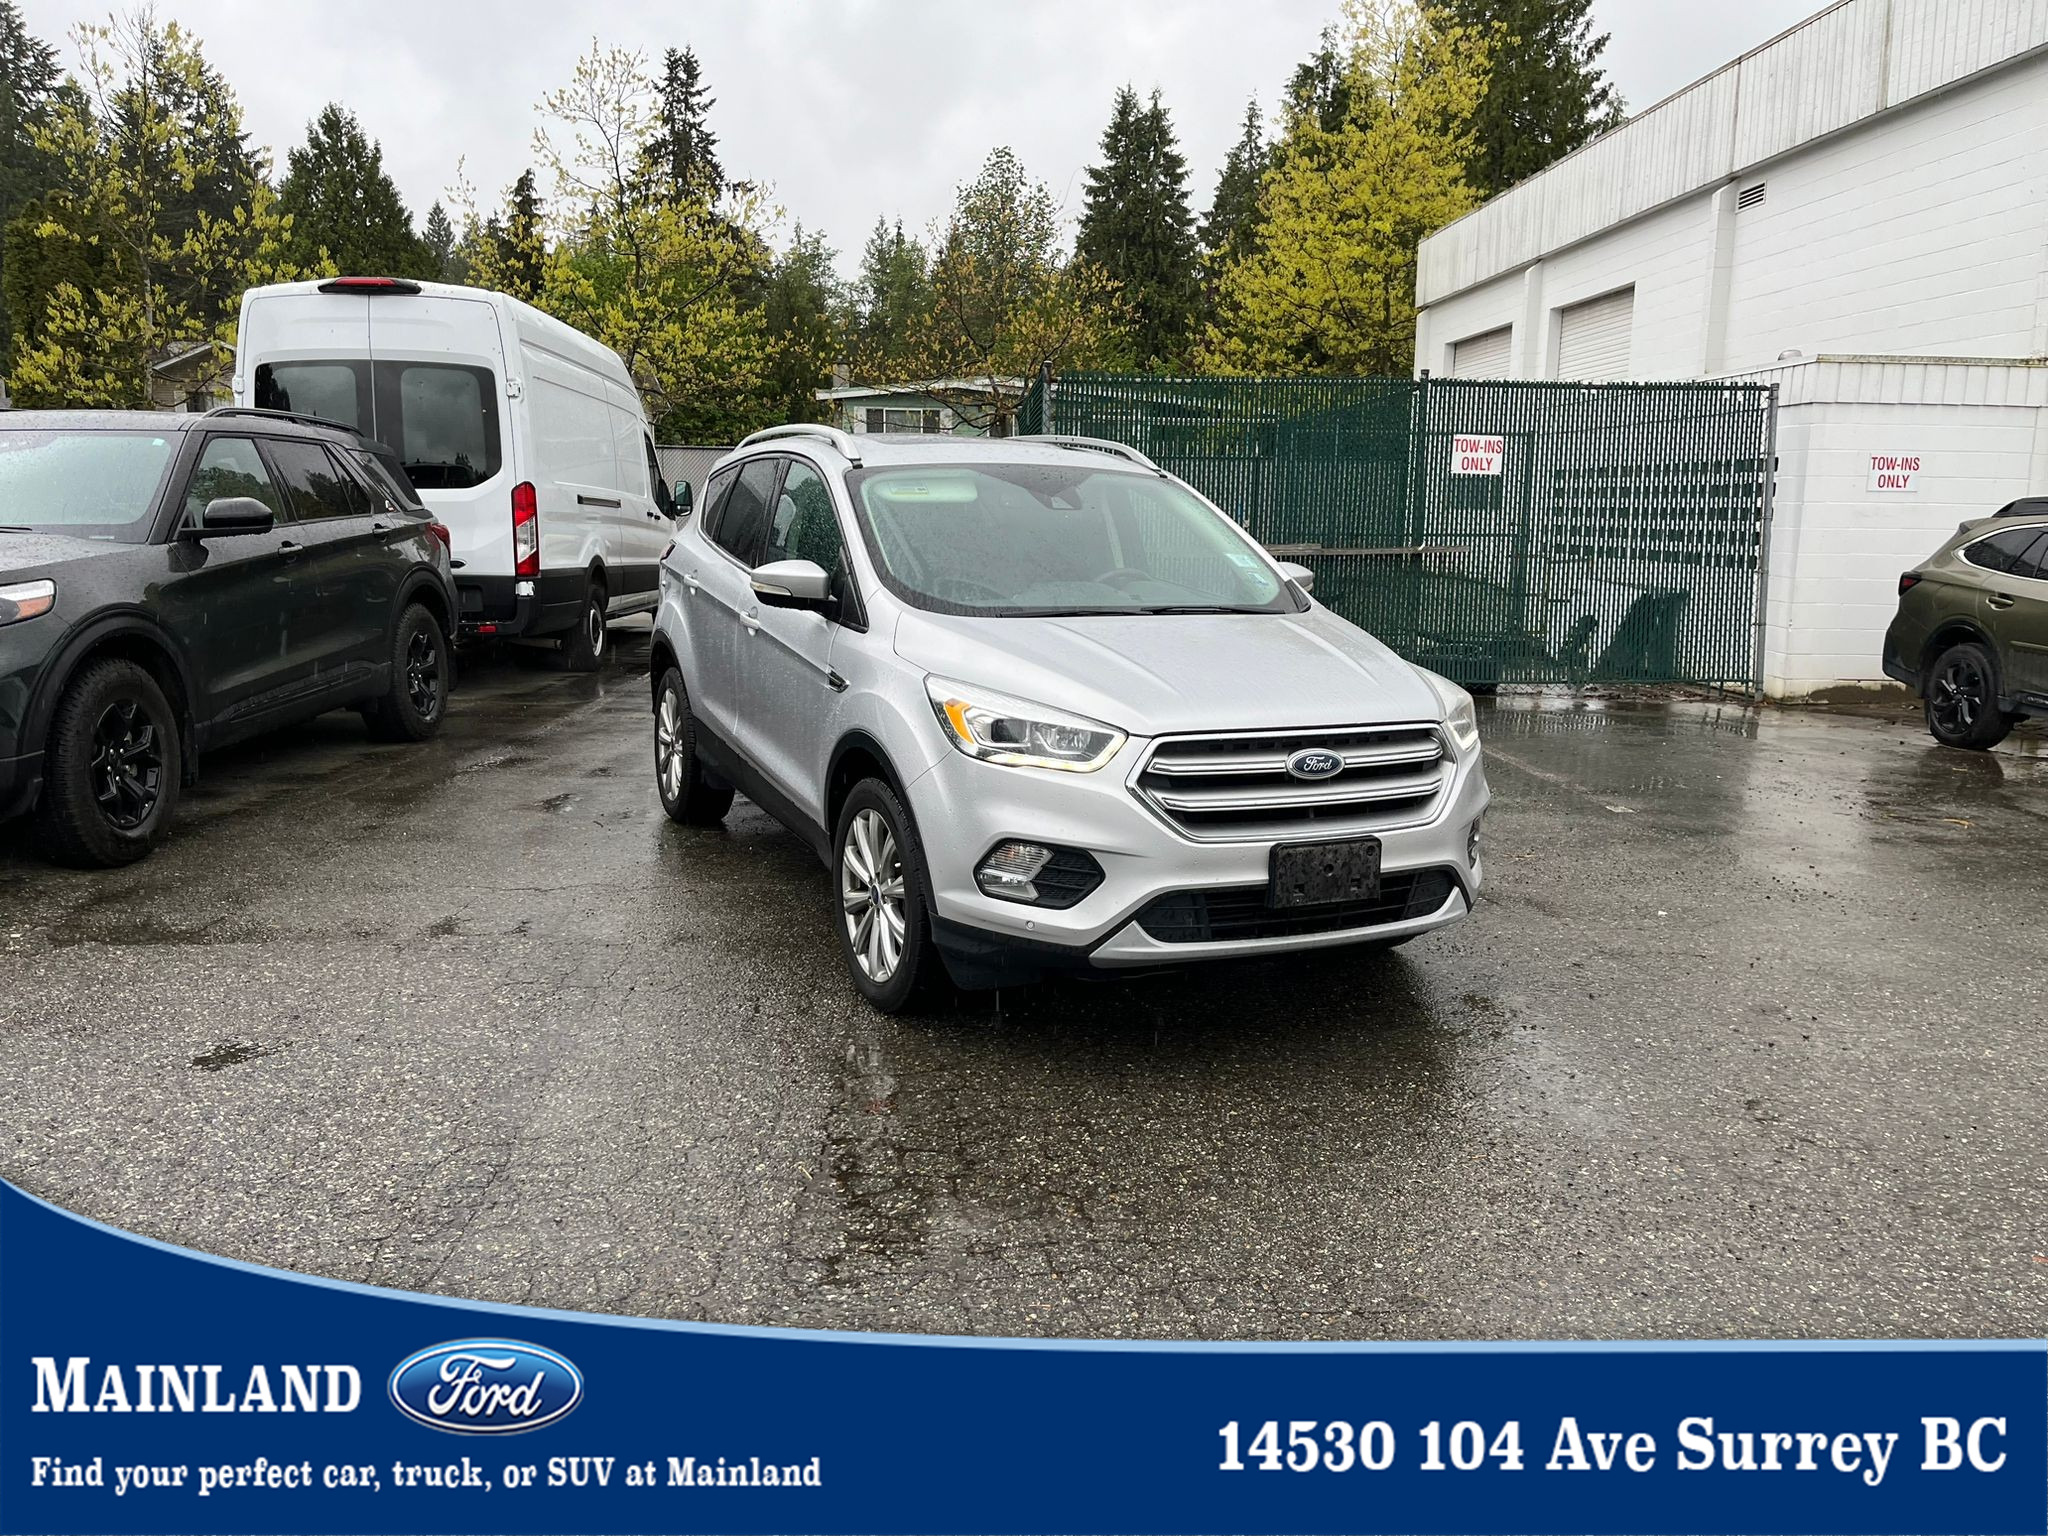 2017 Ford Escape Titanium CANADIAN TOURING PACKAGE | 4X4 | MOONROOF